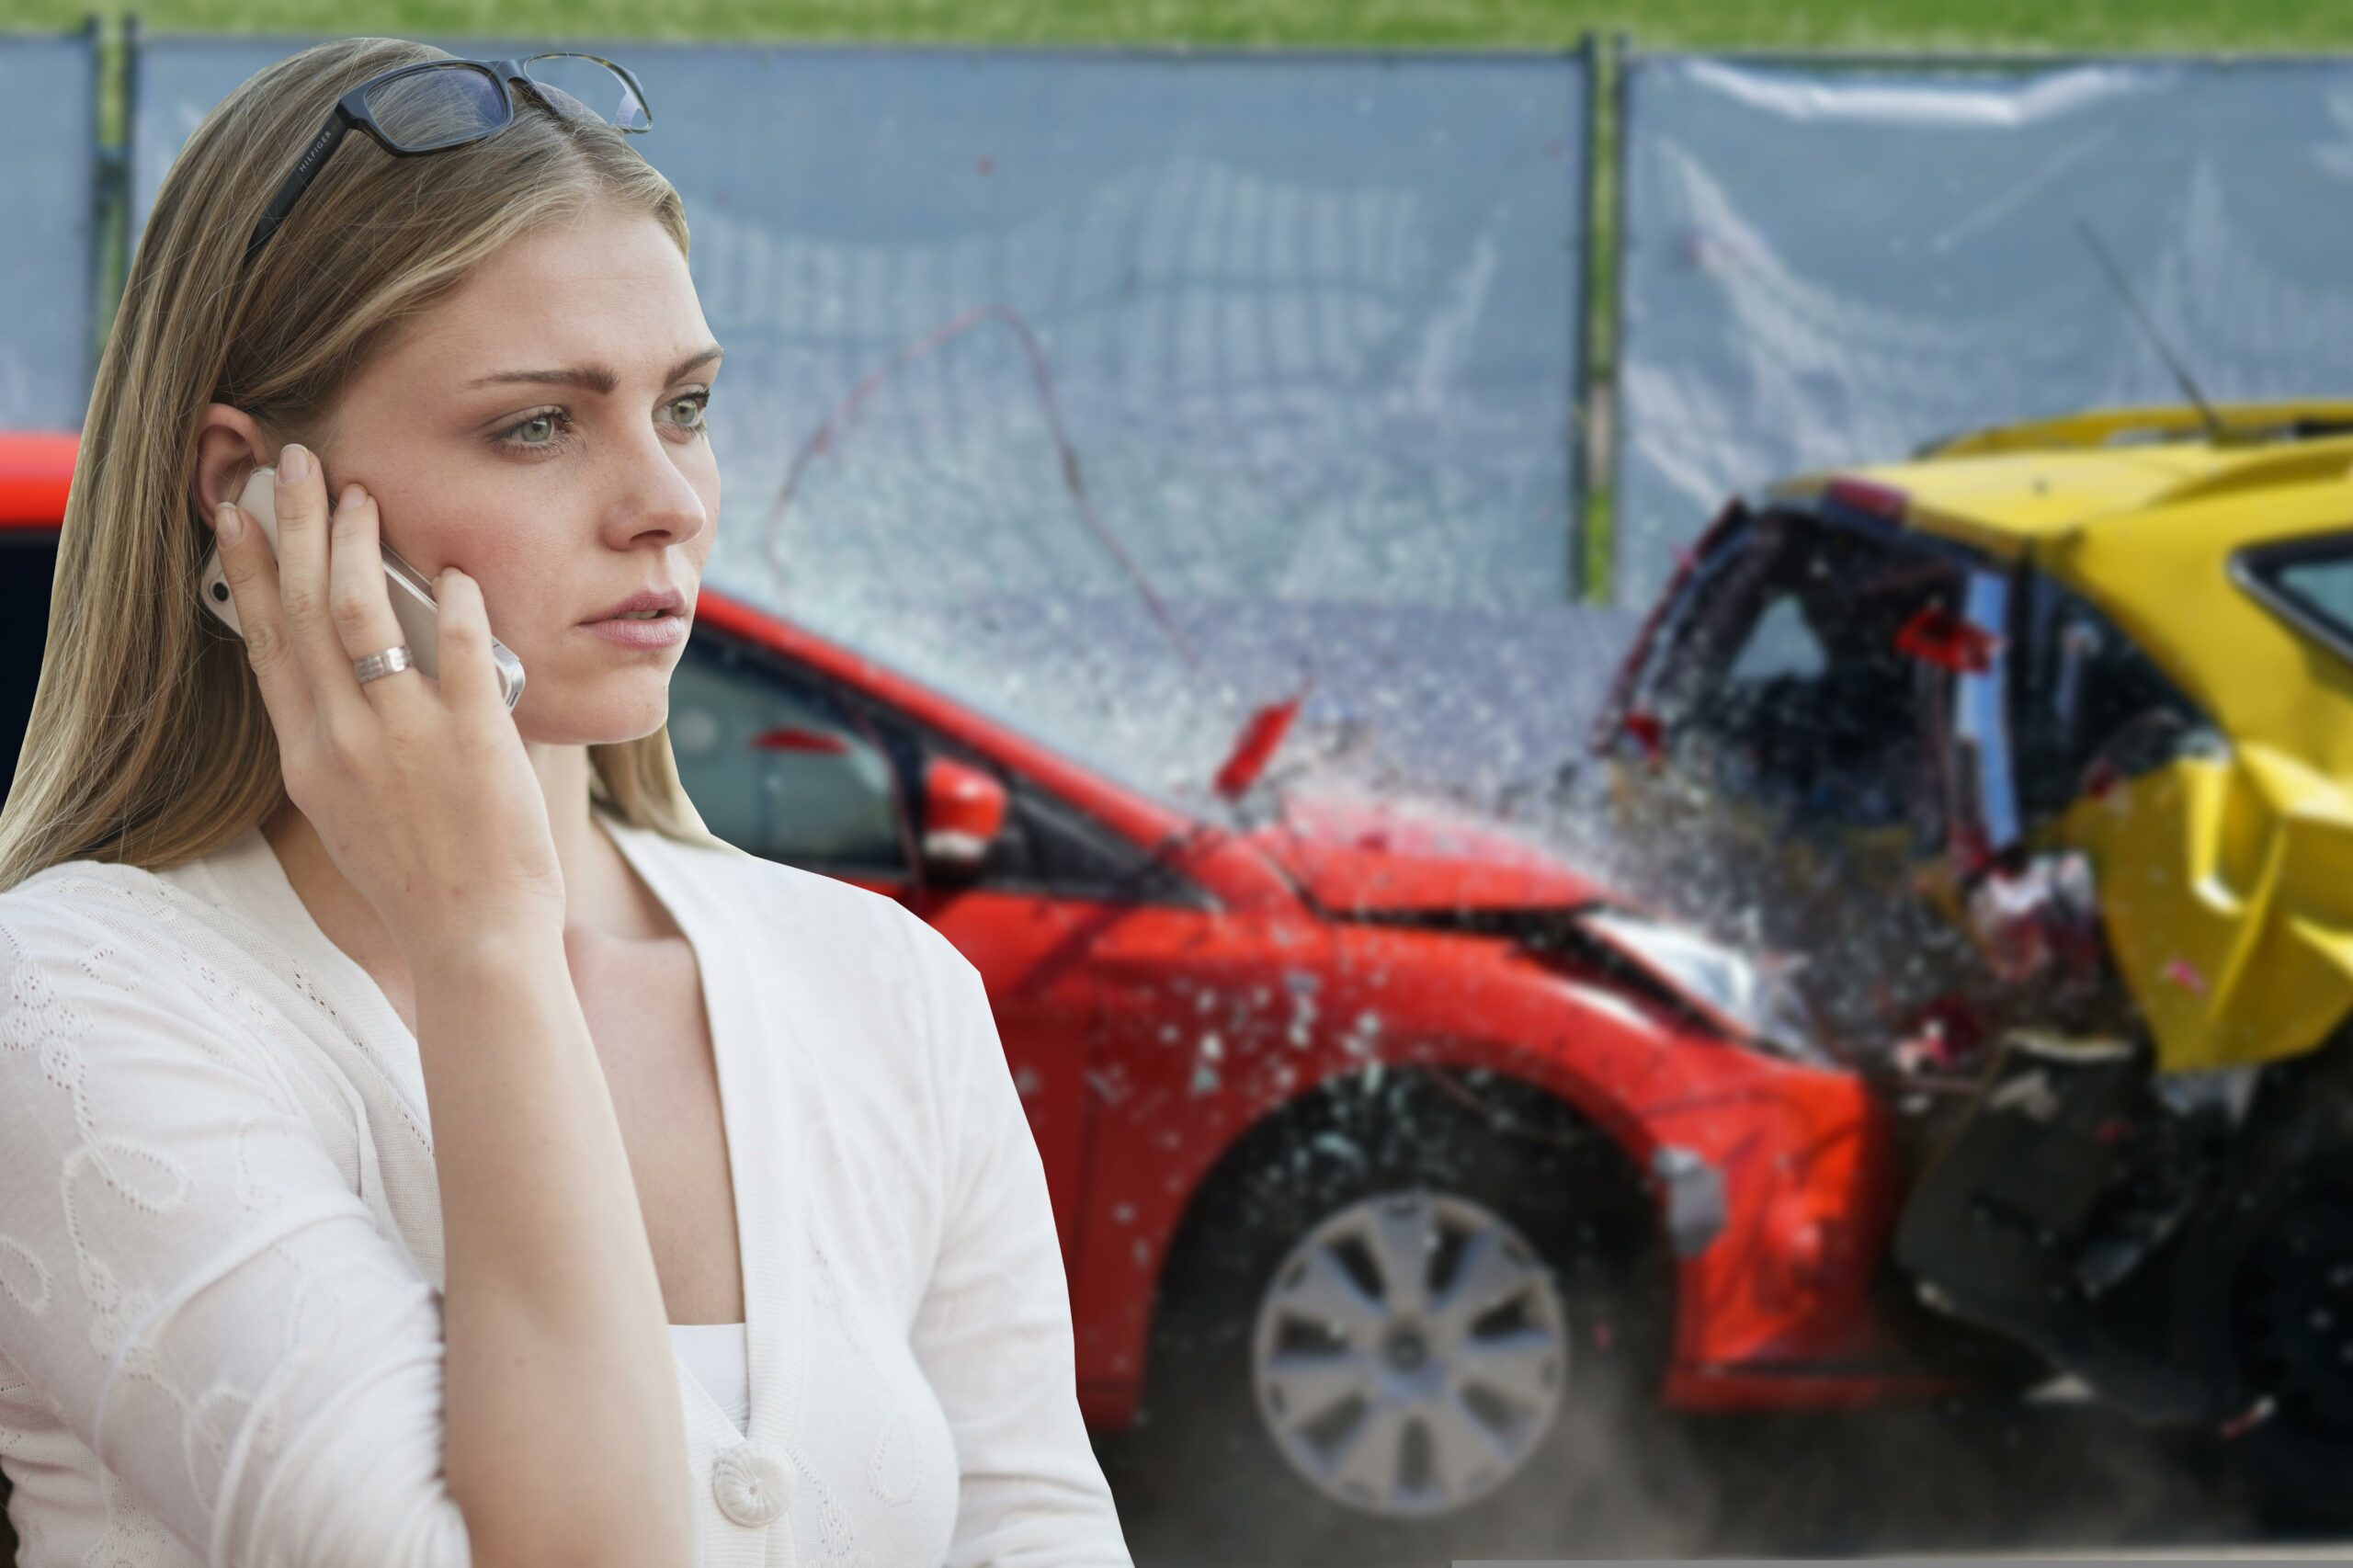 Claims for Vehicle Accident Victims in Massachusetts